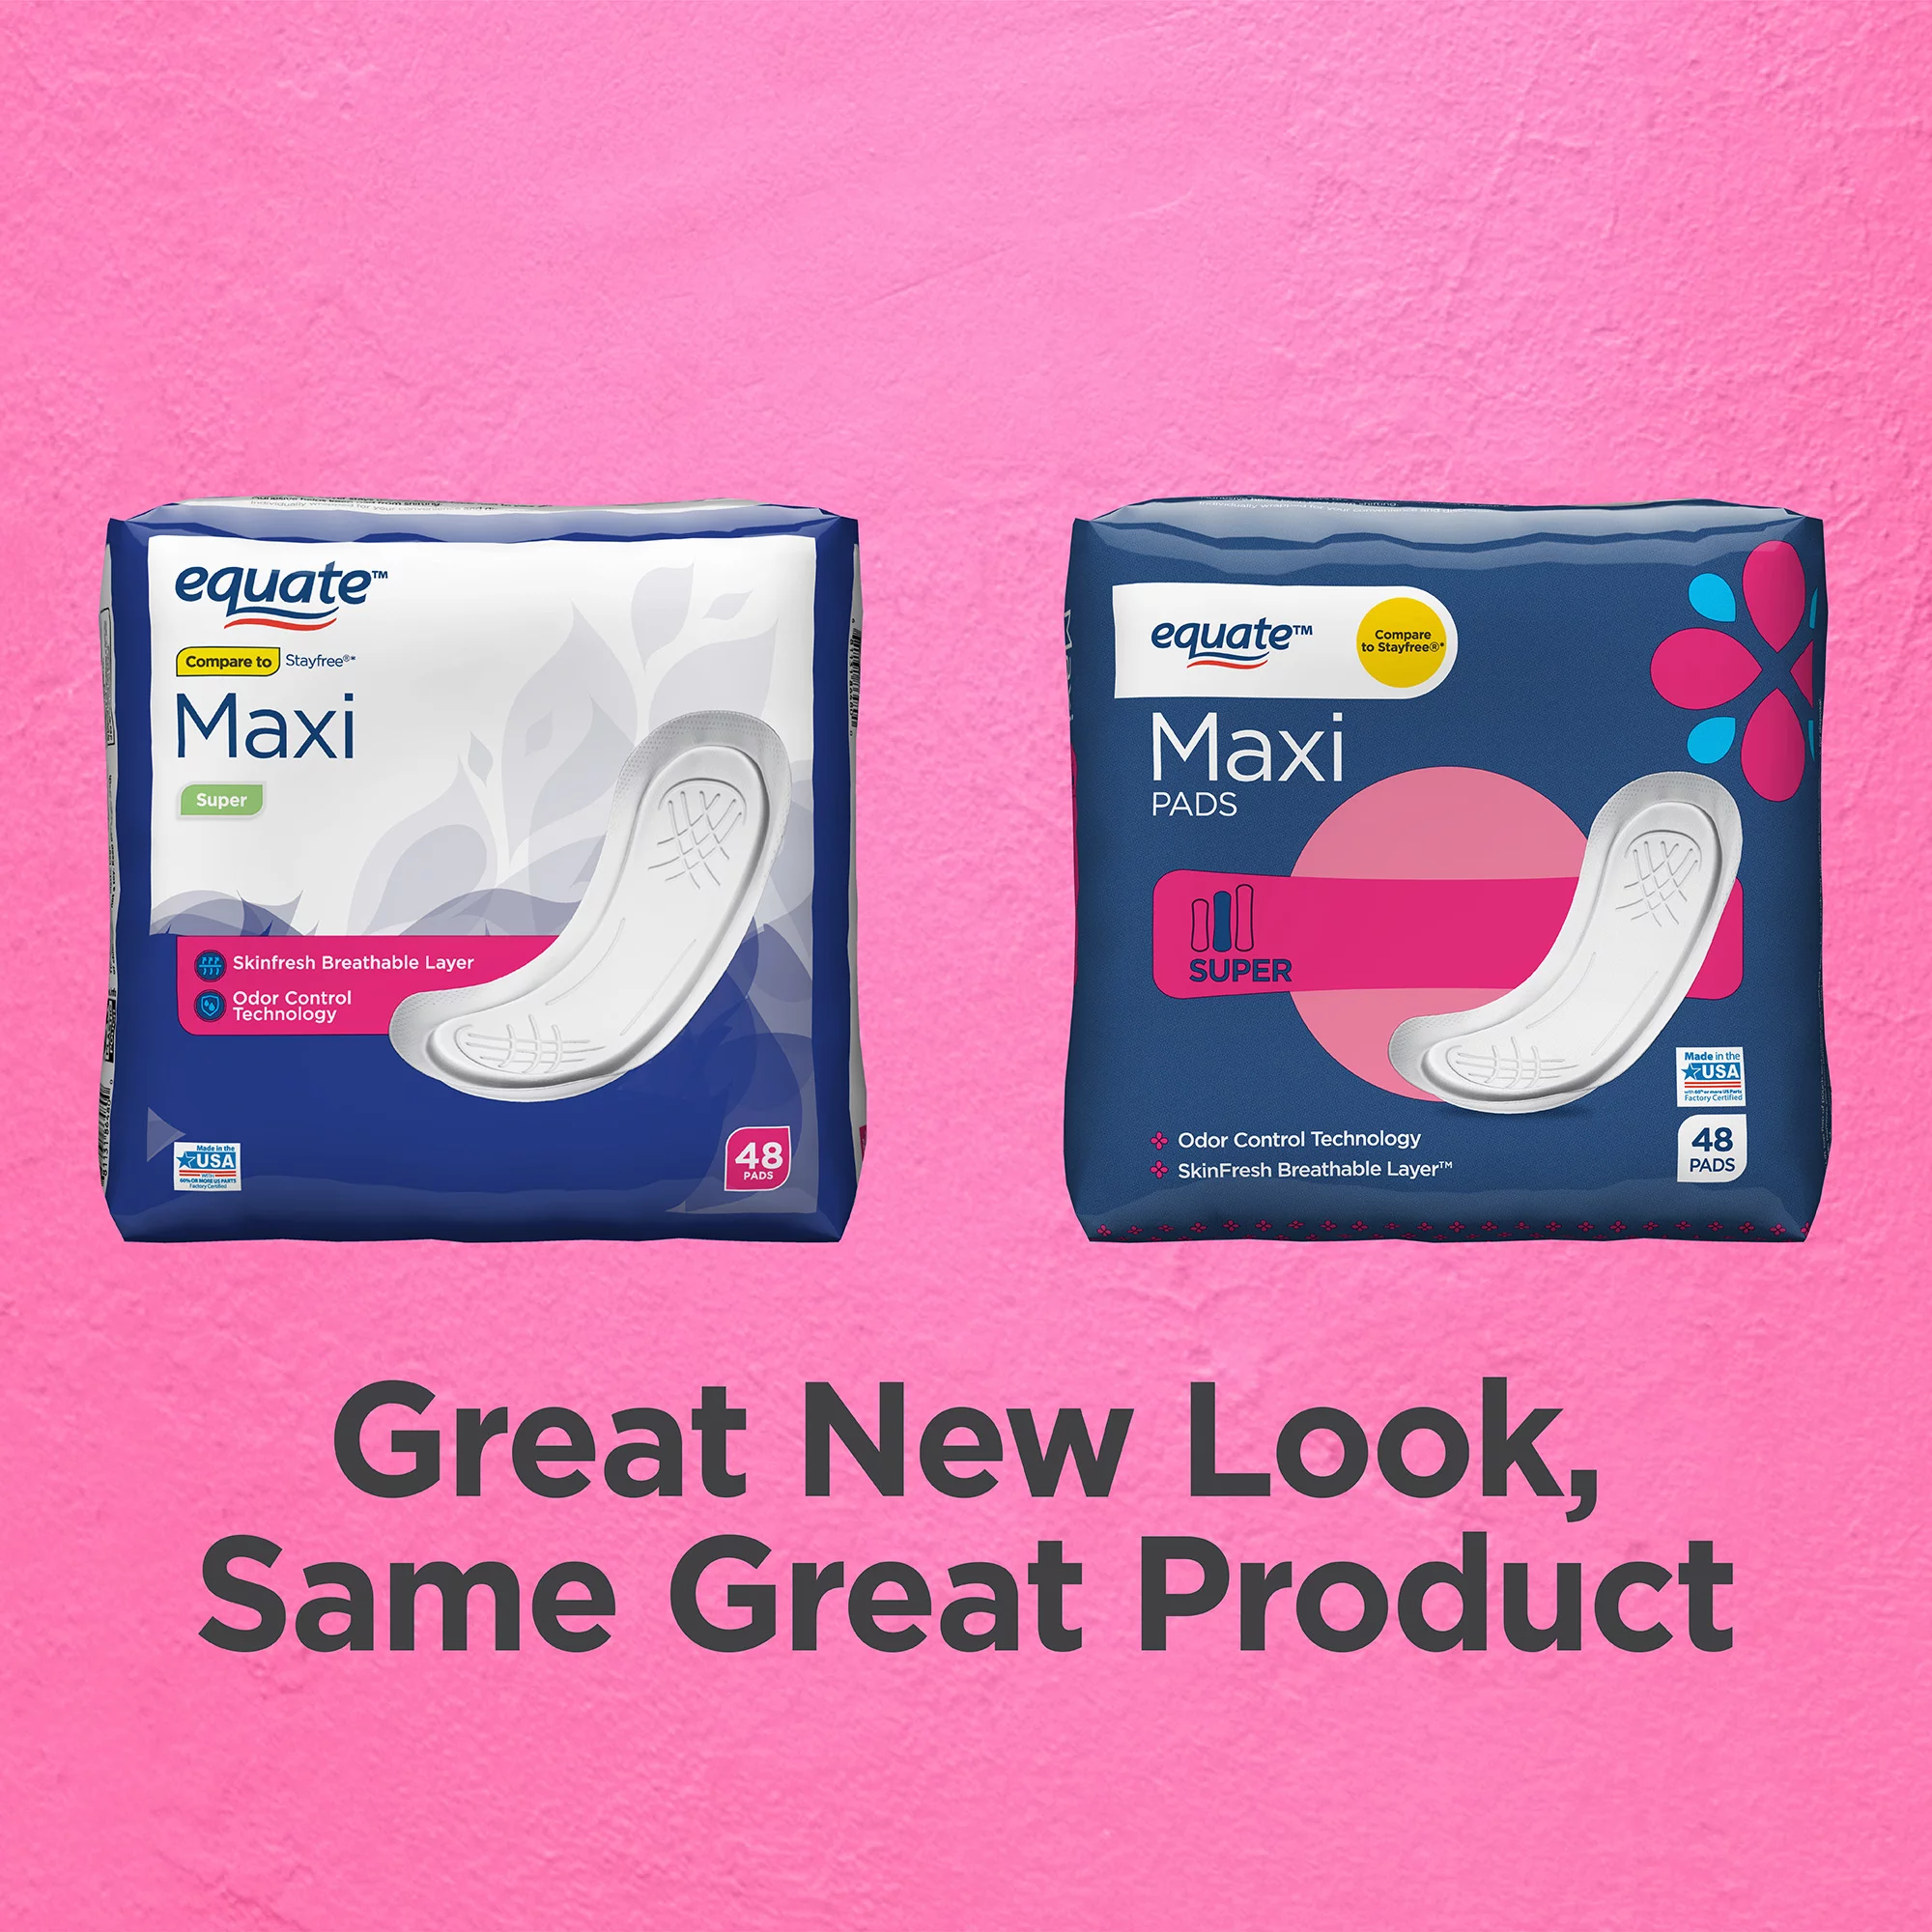 Equate Maxi Pads ,Super 48 pads, Compare to Stayfree